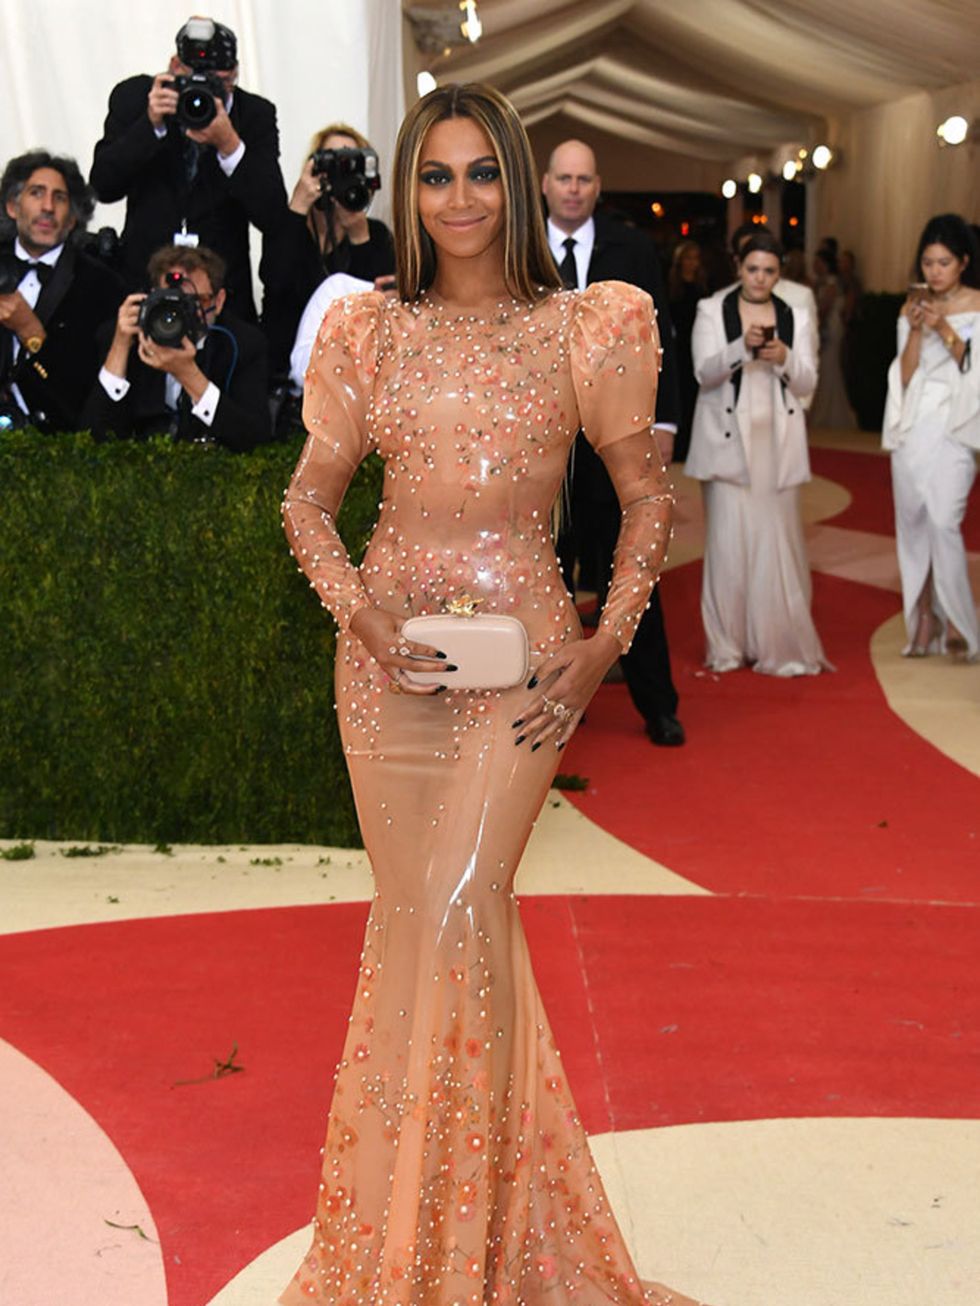 Beyoncé wears Givenchy Haute Couture by Riccardo Tisci at the Met Gala in New York, May 2016.